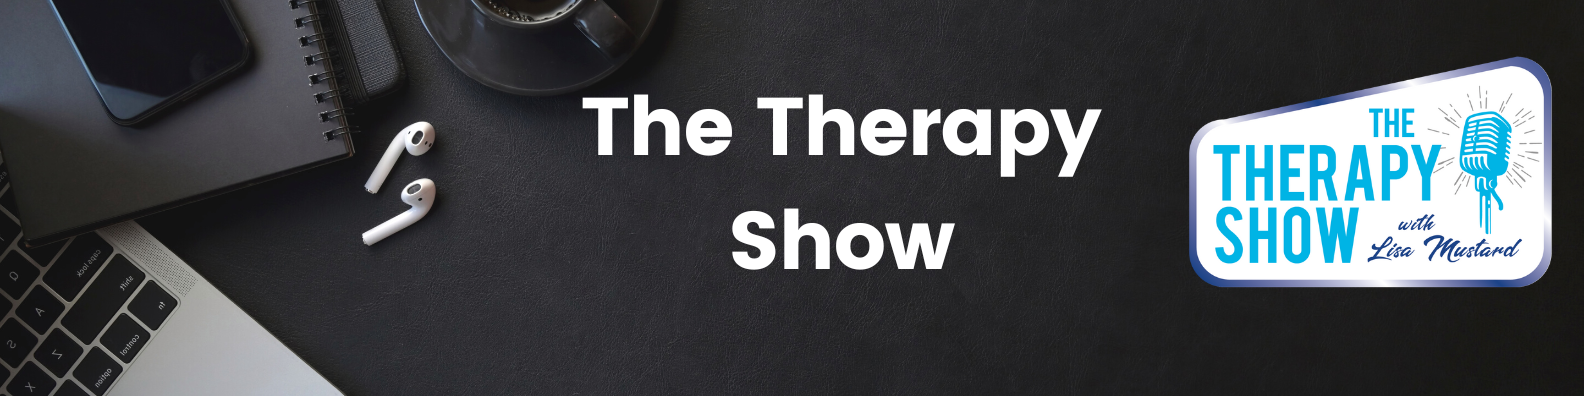 The Therapy Show with Lisa Mustard - PsychCraft Network